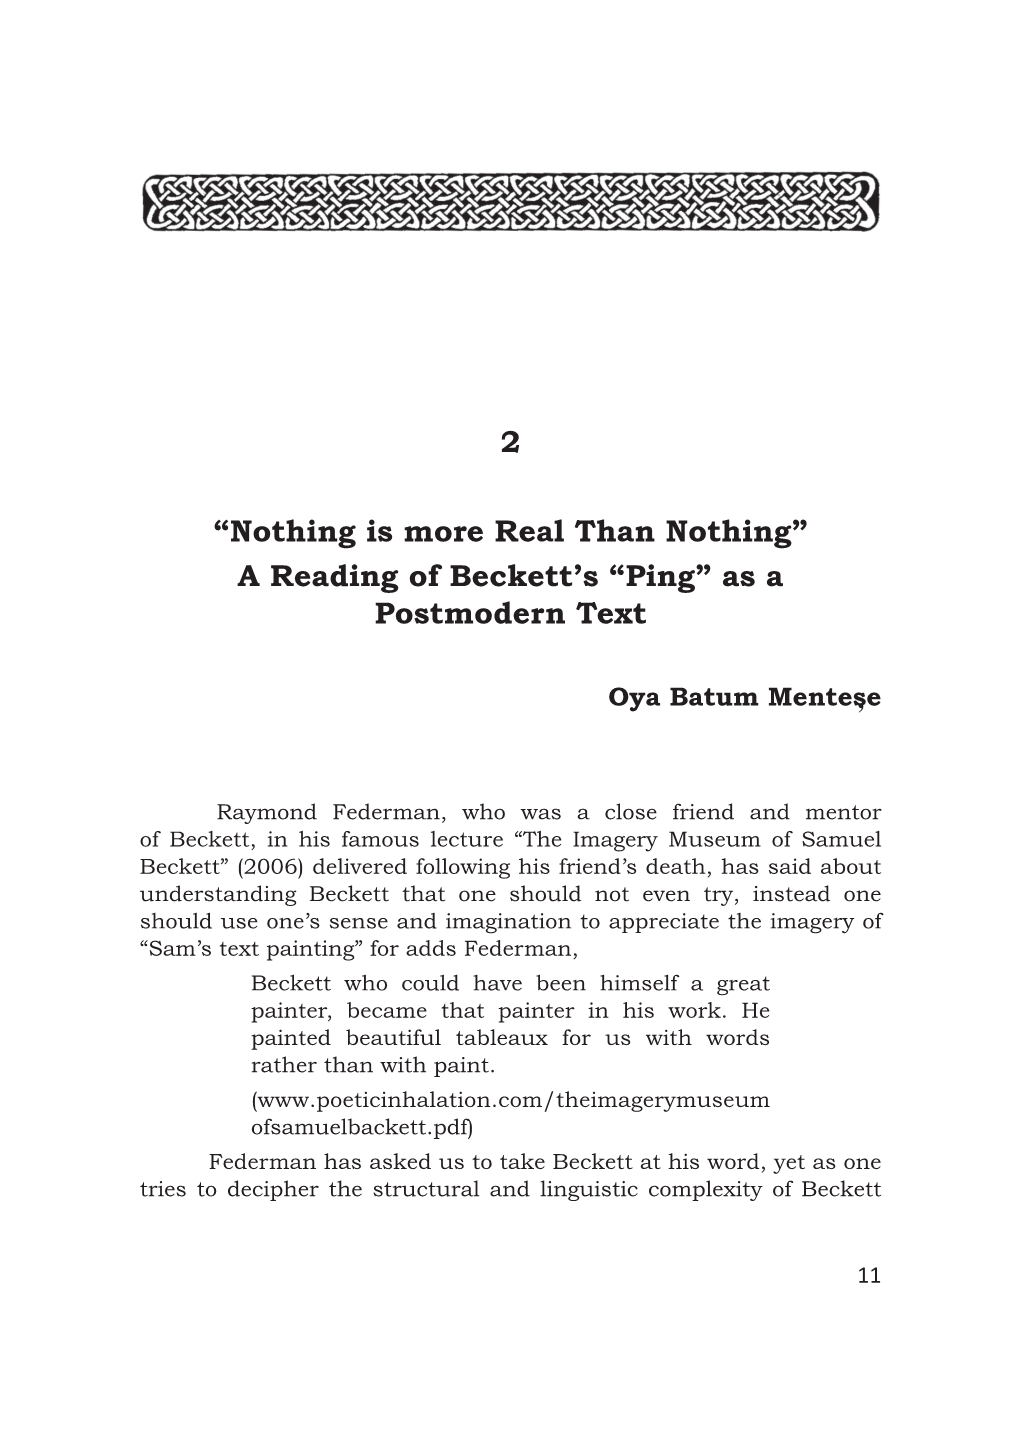 2 “Nothing Is More Real Than Nothing” a Reading of Beckett's